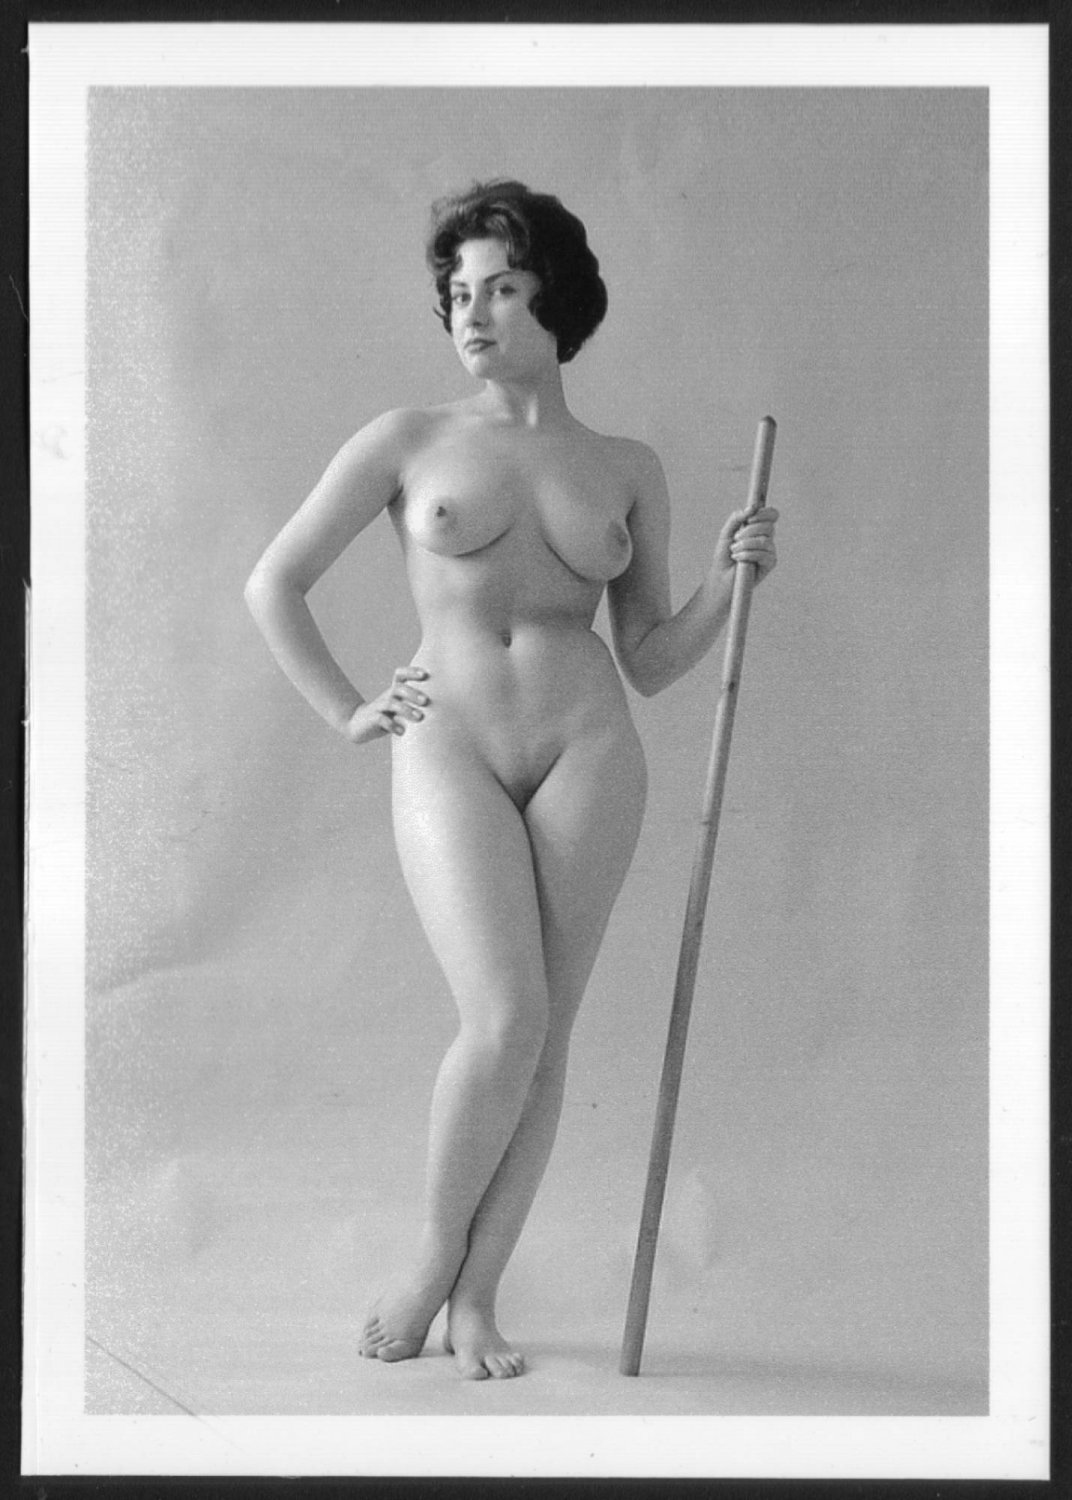 June palmer totally nude new reprint photo 5X7 #336.